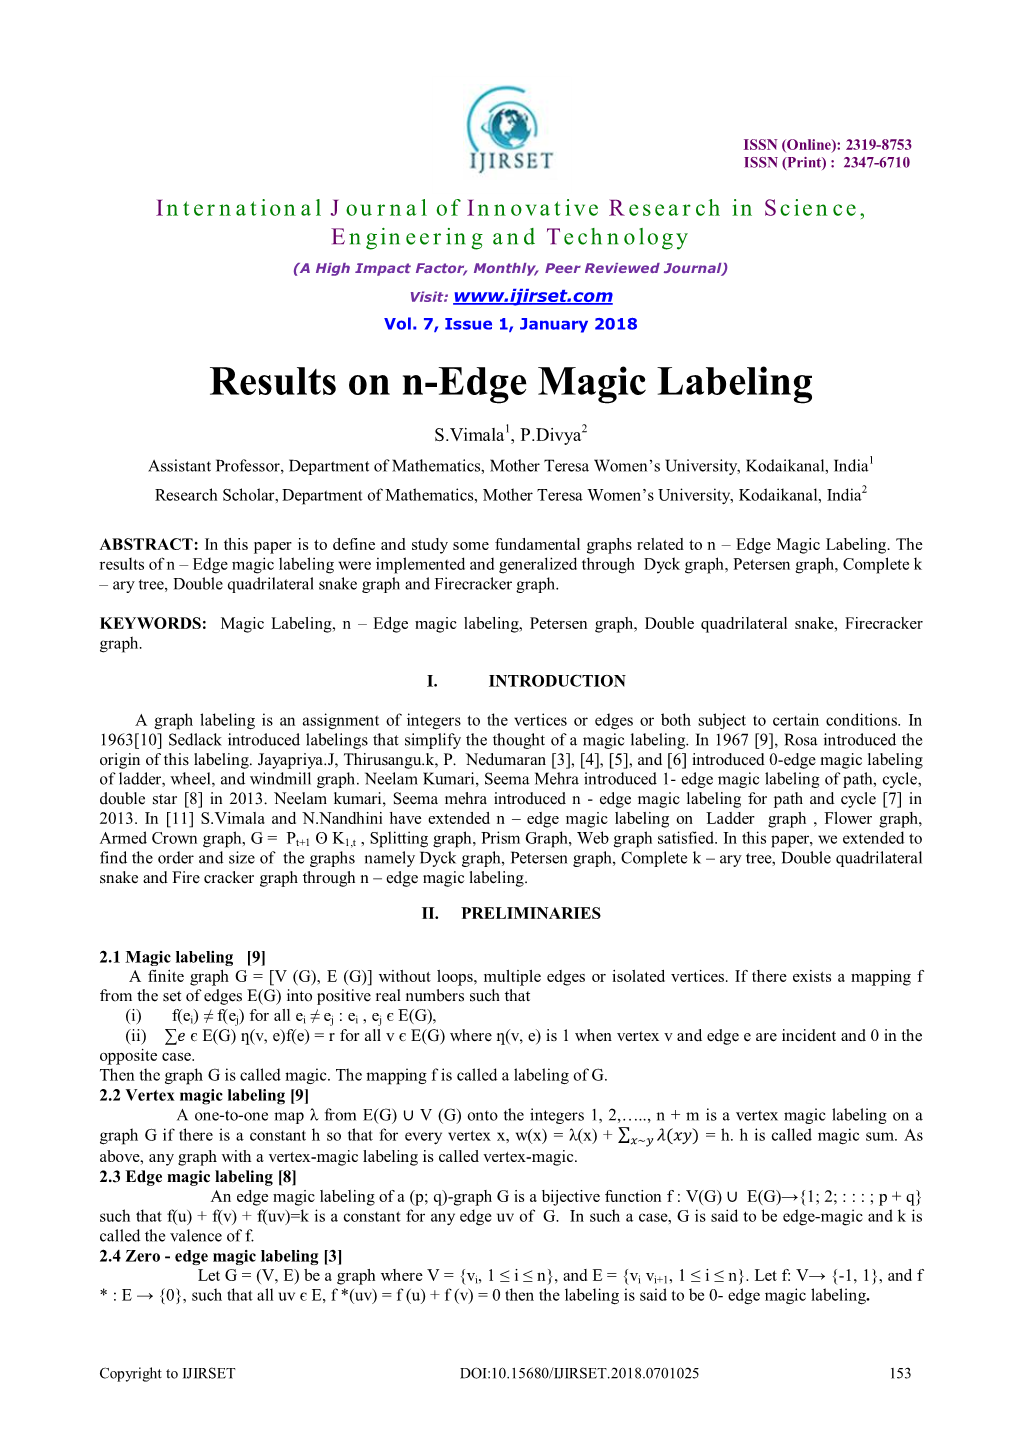 Results on N-Edge Magic Labeling